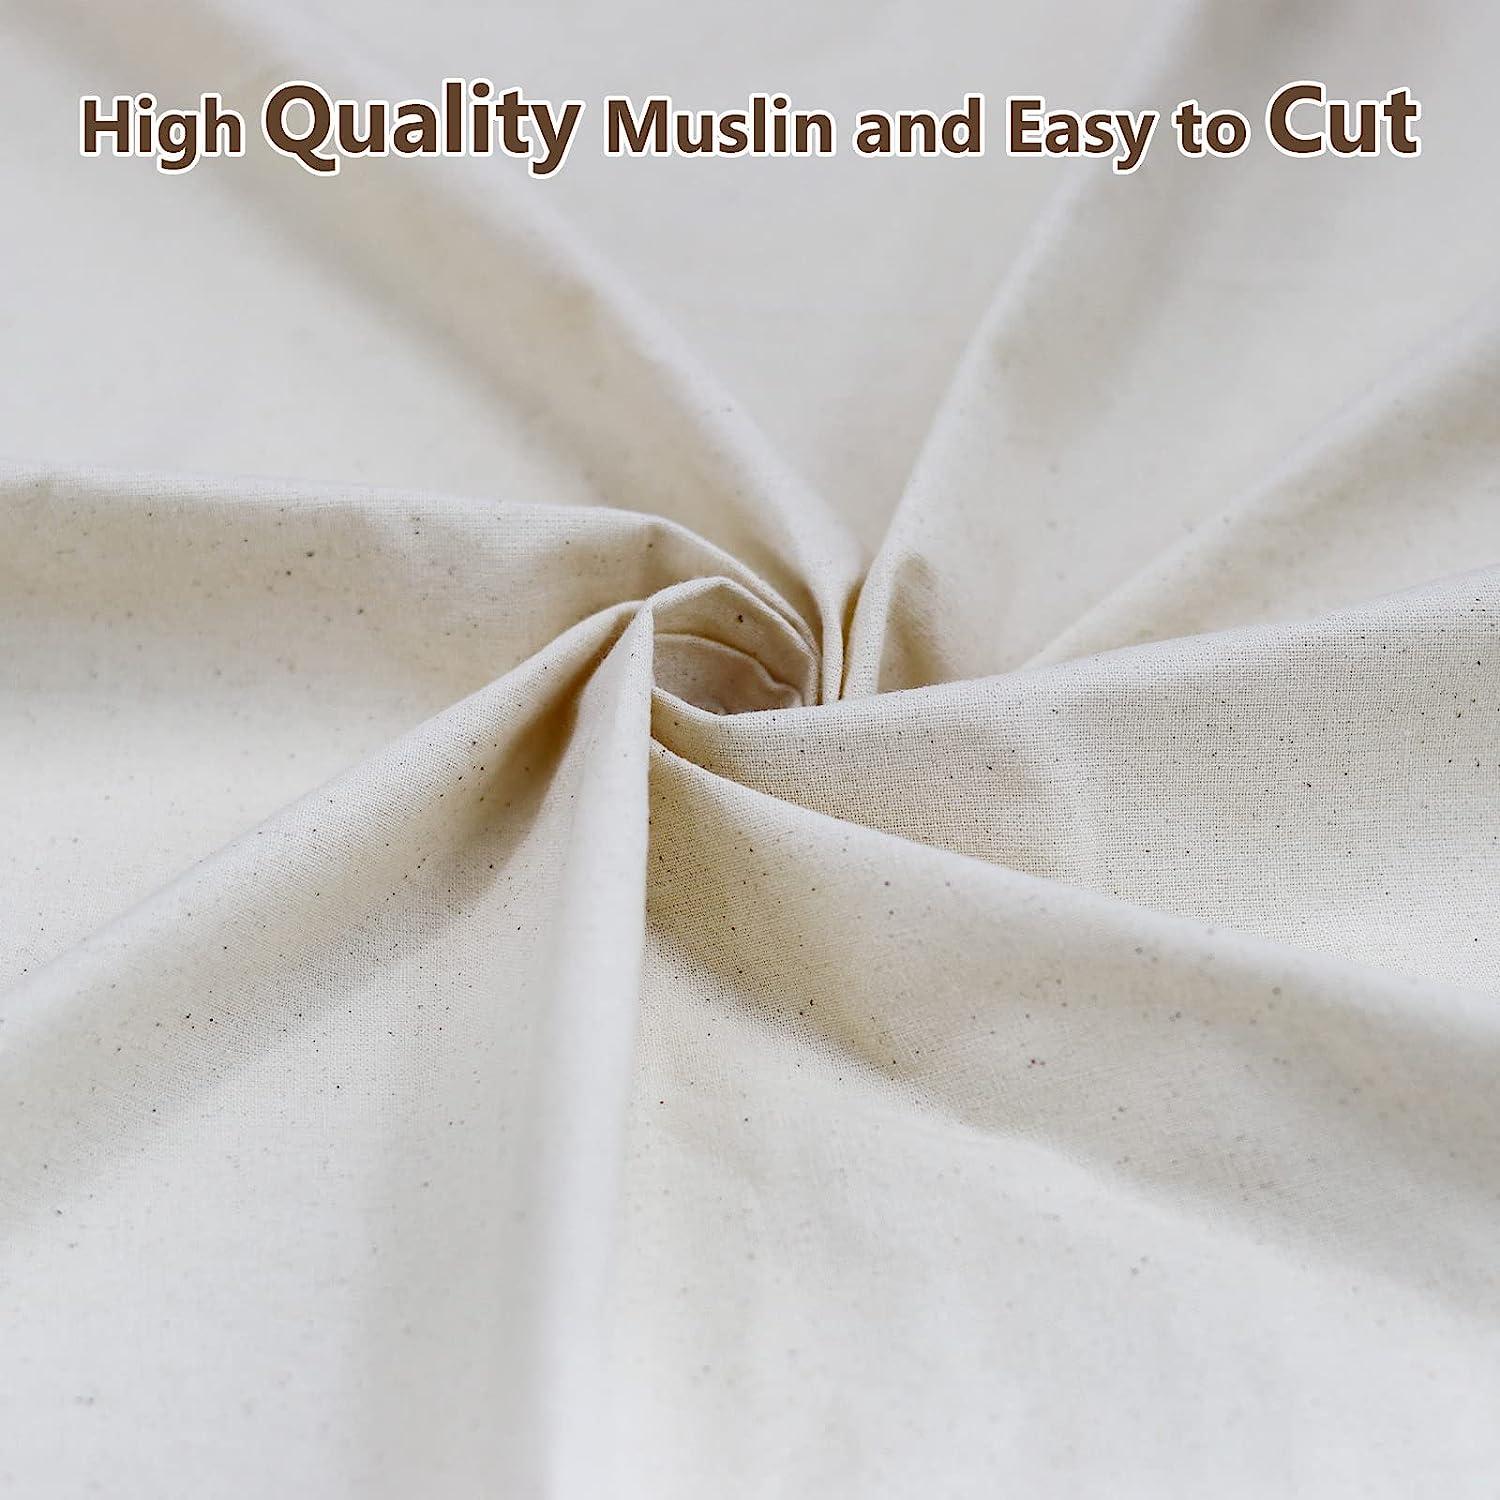 HOTGODEN Medium Weight 100% Cotton Muslin Fabric: 63 inch x 2 5 10 Yards  Unbleached Muslin Linen Fabric Material for Sewing Material Apparel Cloth 2  YARD Natural